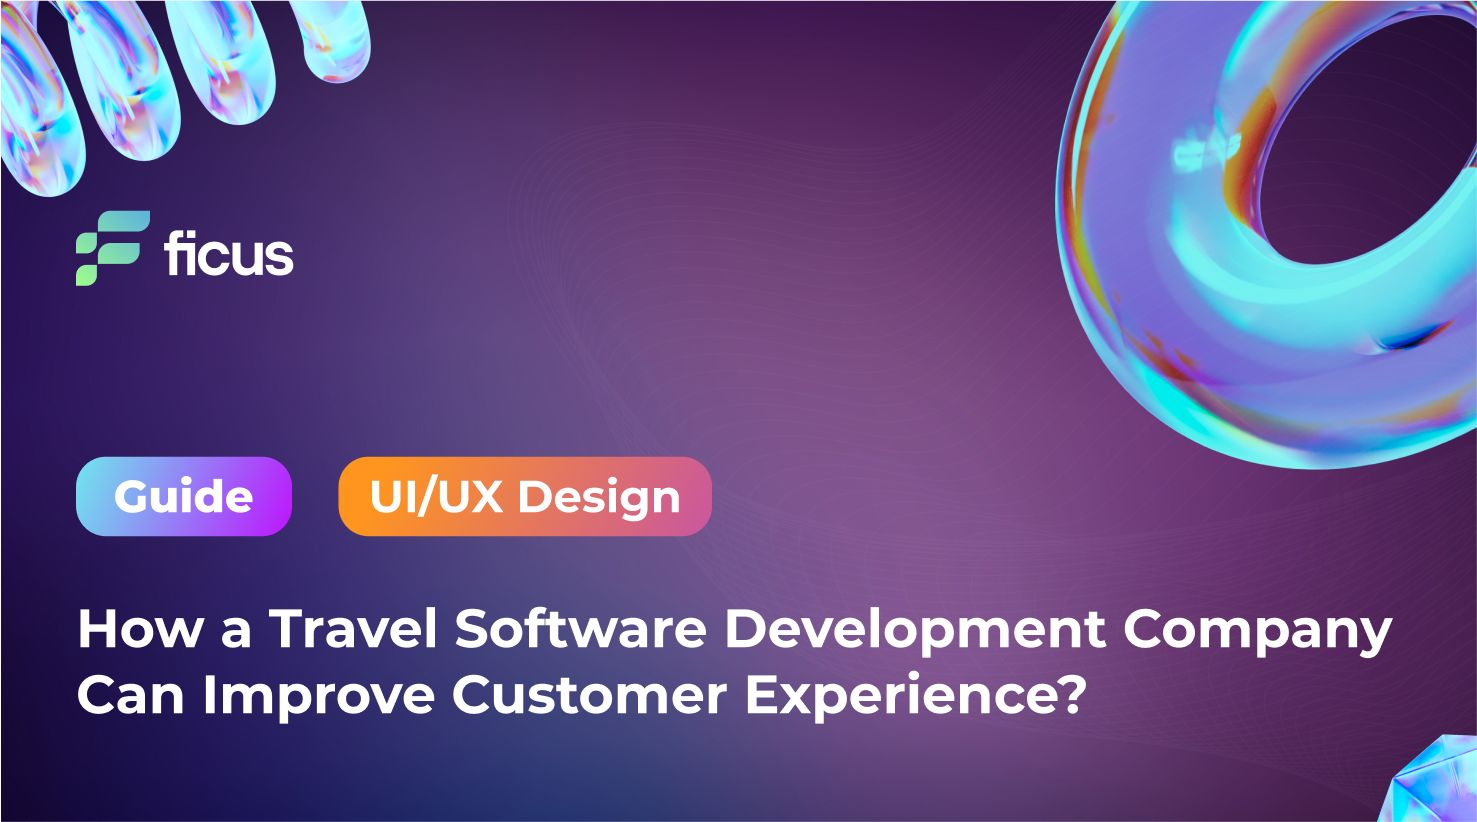 How a Travel Software Development Company Can Improve Customer Experience?